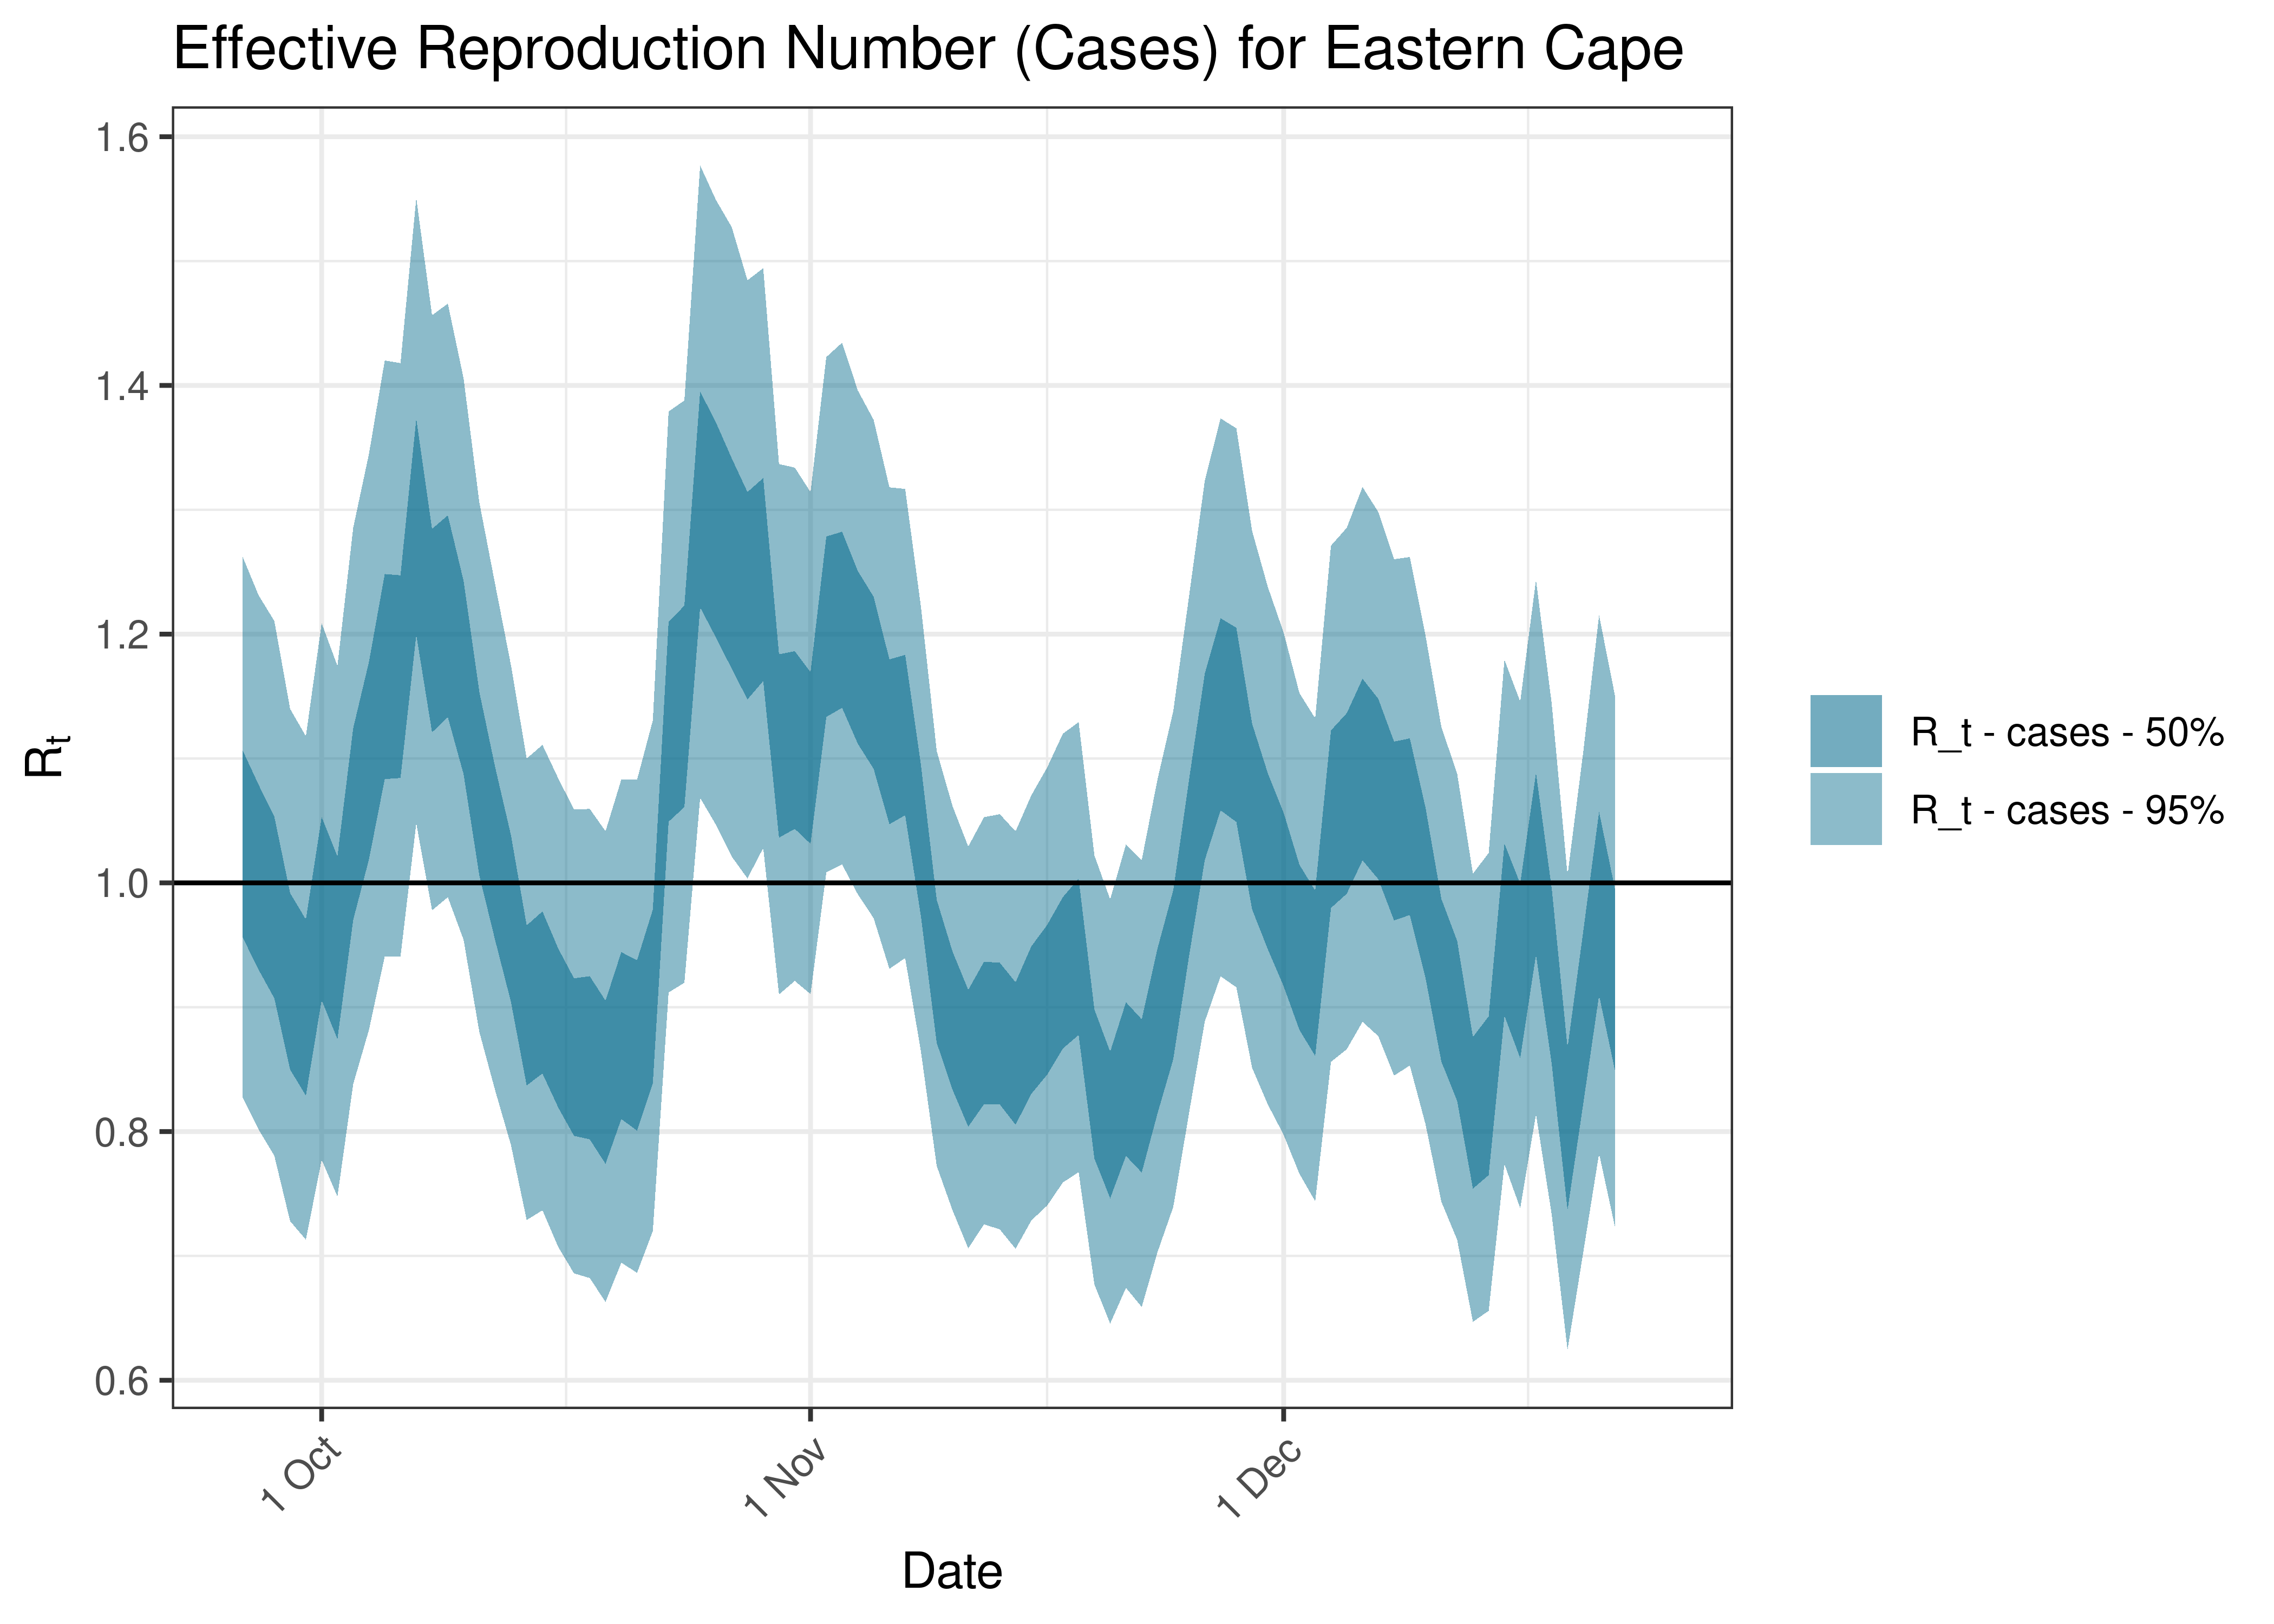 Estimated Effective Reproduction Number Based on Cases for Eastern Cape over last 90 days